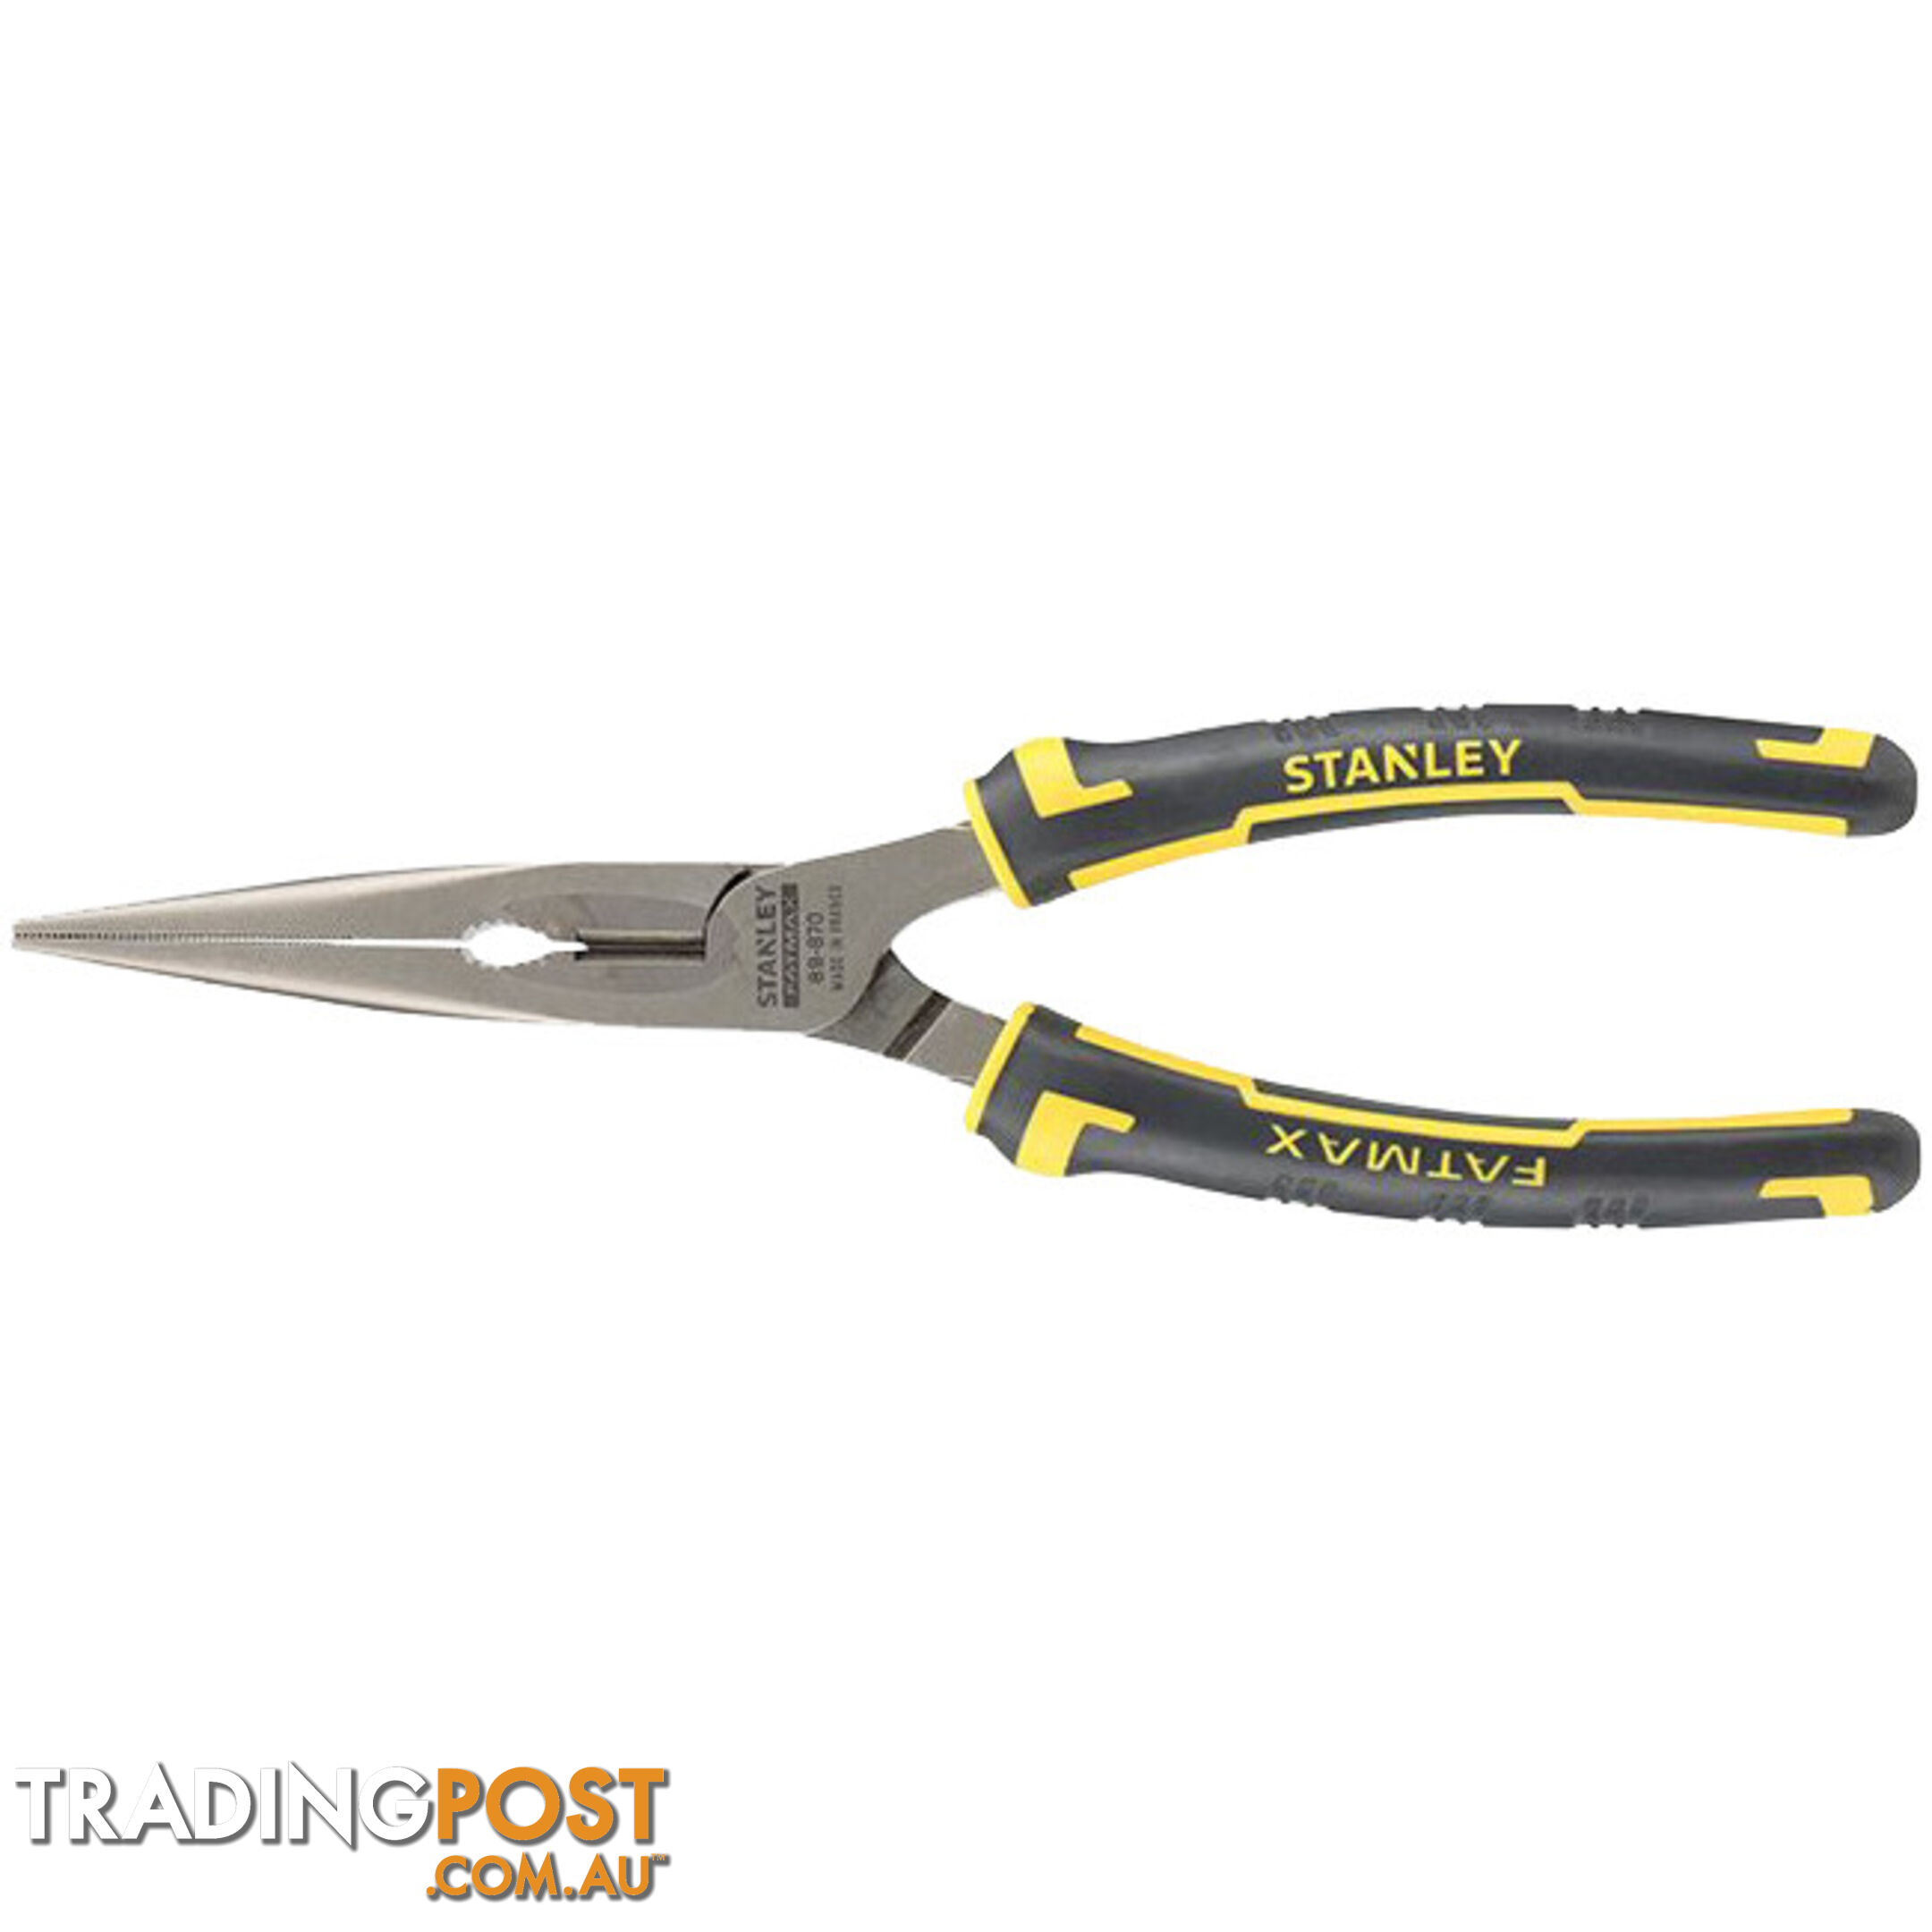 89-870 200MM LONG NOSE PLIER MADE IN FRANCE